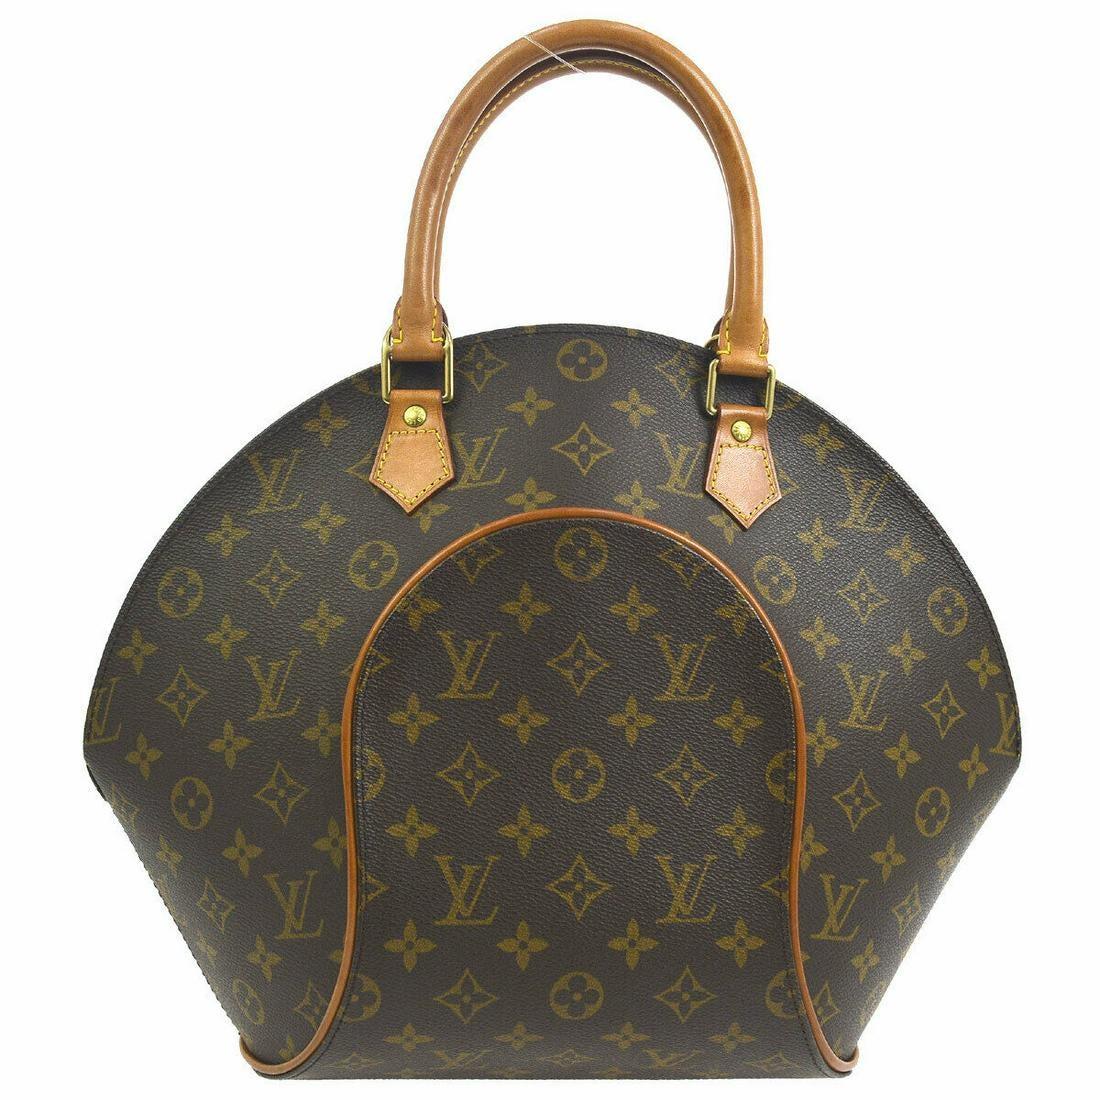 Vintage Louis Vuitton Ellipse MM Handbag in Monogram Canvas, France, February 2000 (MI0020). Handcrafted in France, this classic Ellipse bag has vachetta leather handles and piping as well as signature “LV” studs and hardware. Vachetta handles have